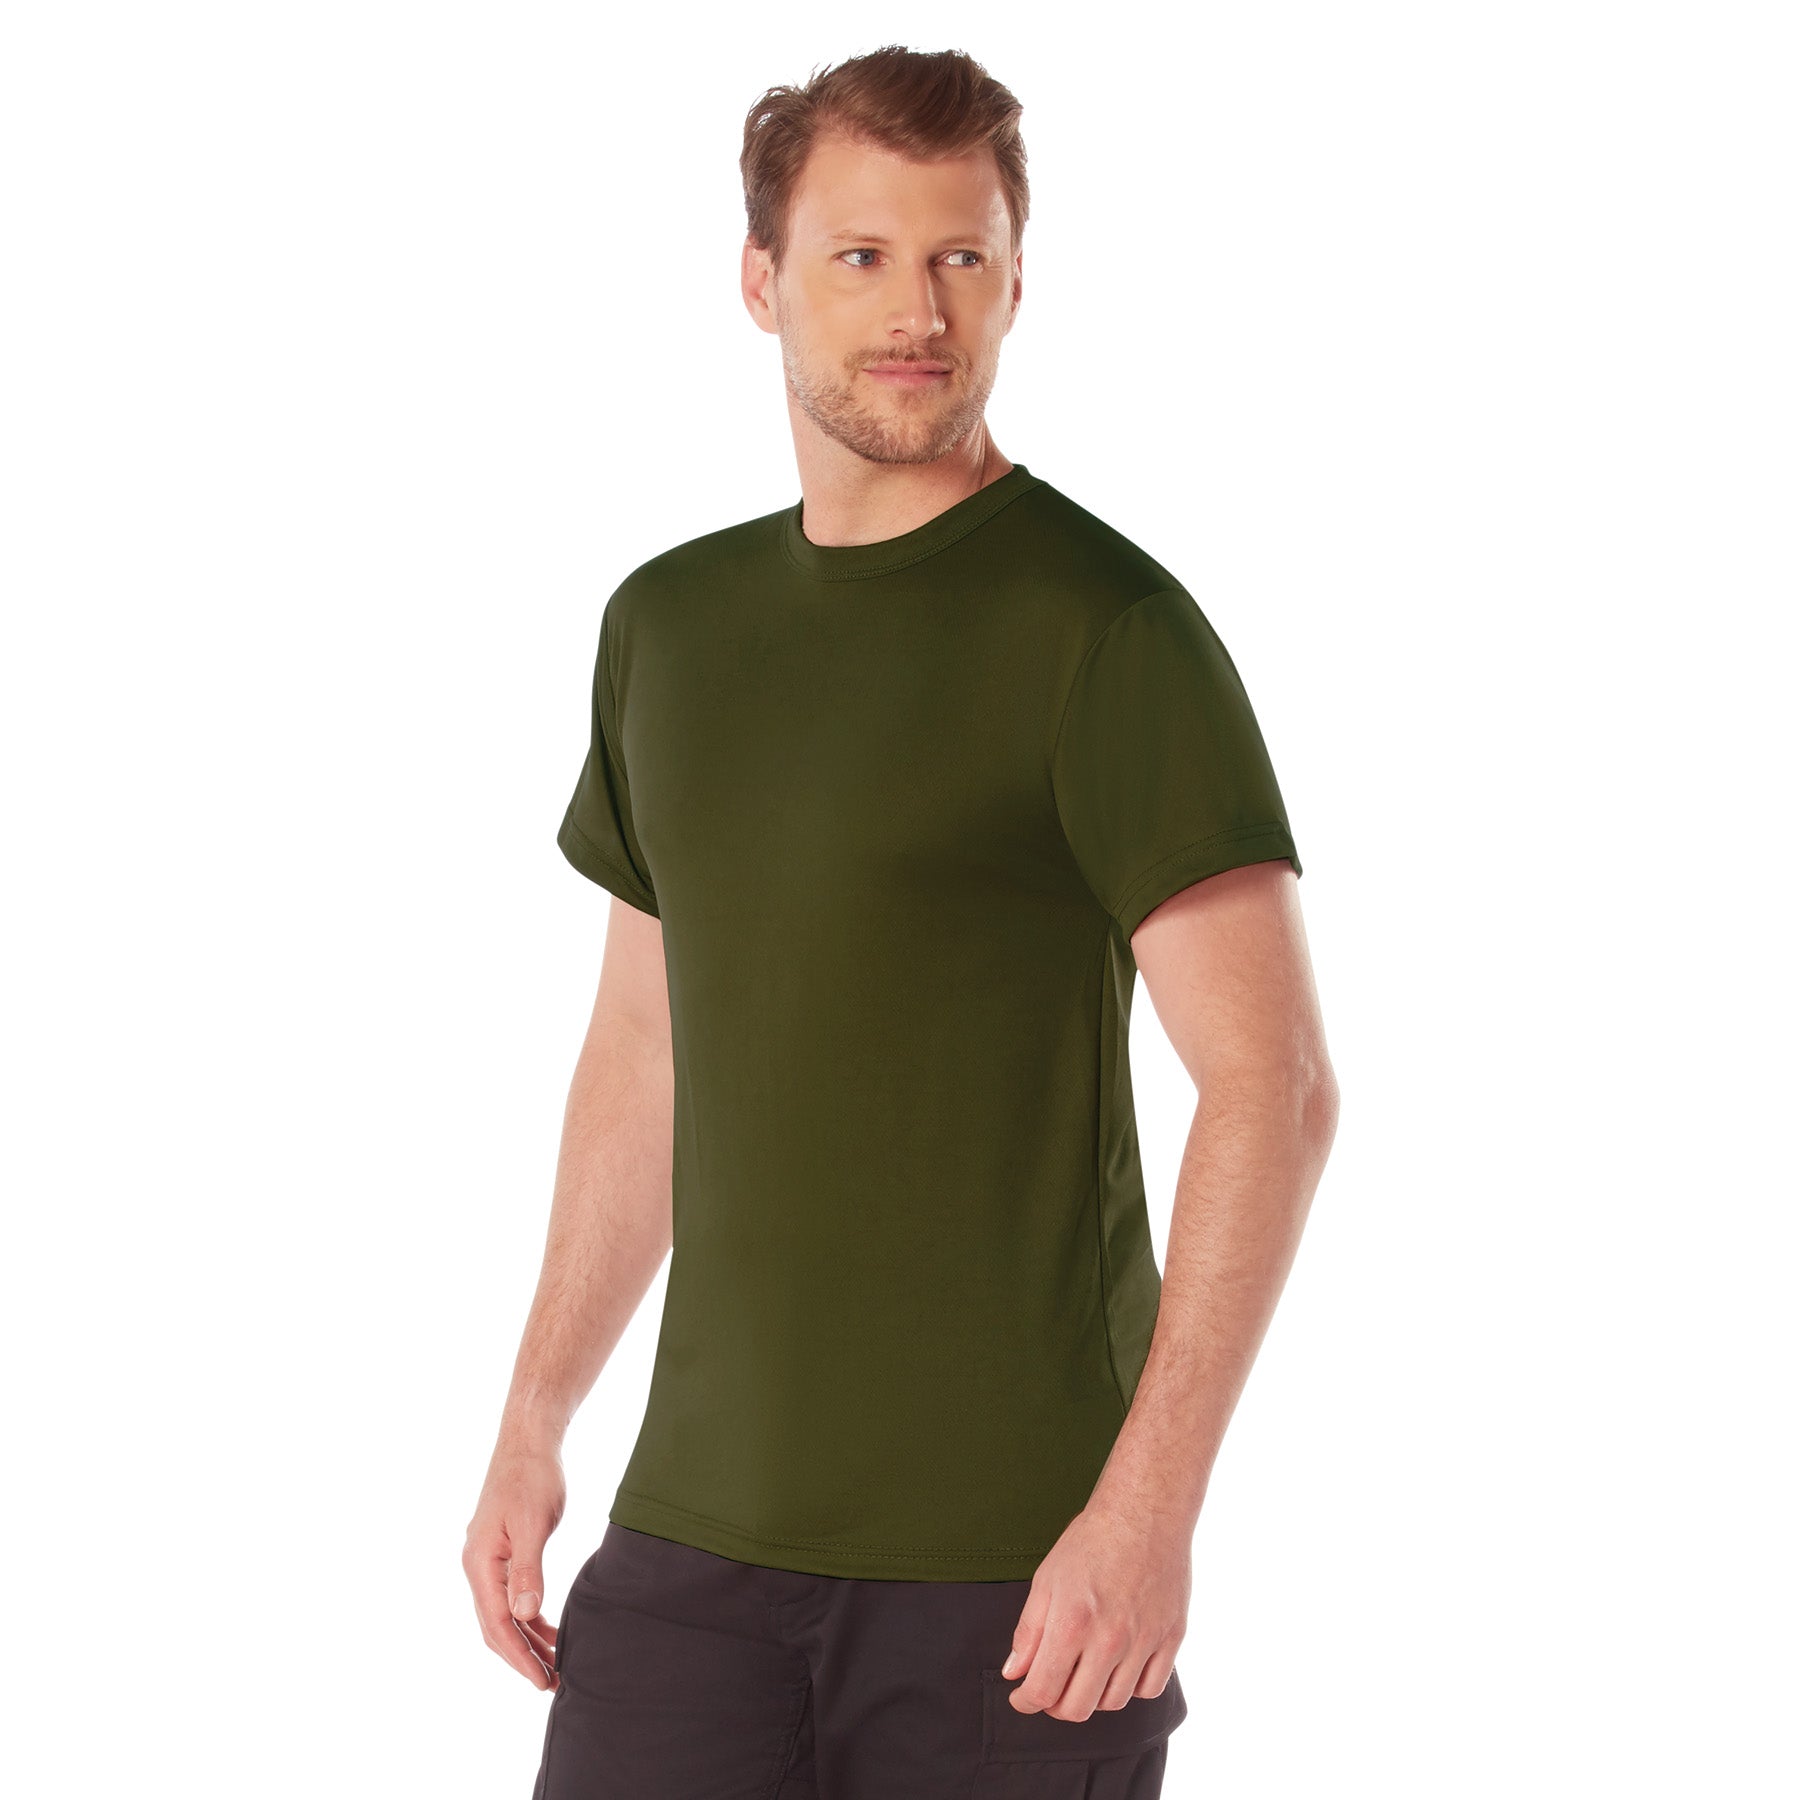 [AR 670-1] Poly Quick Dry Moisture Wicking T-Shirts Olive Drab